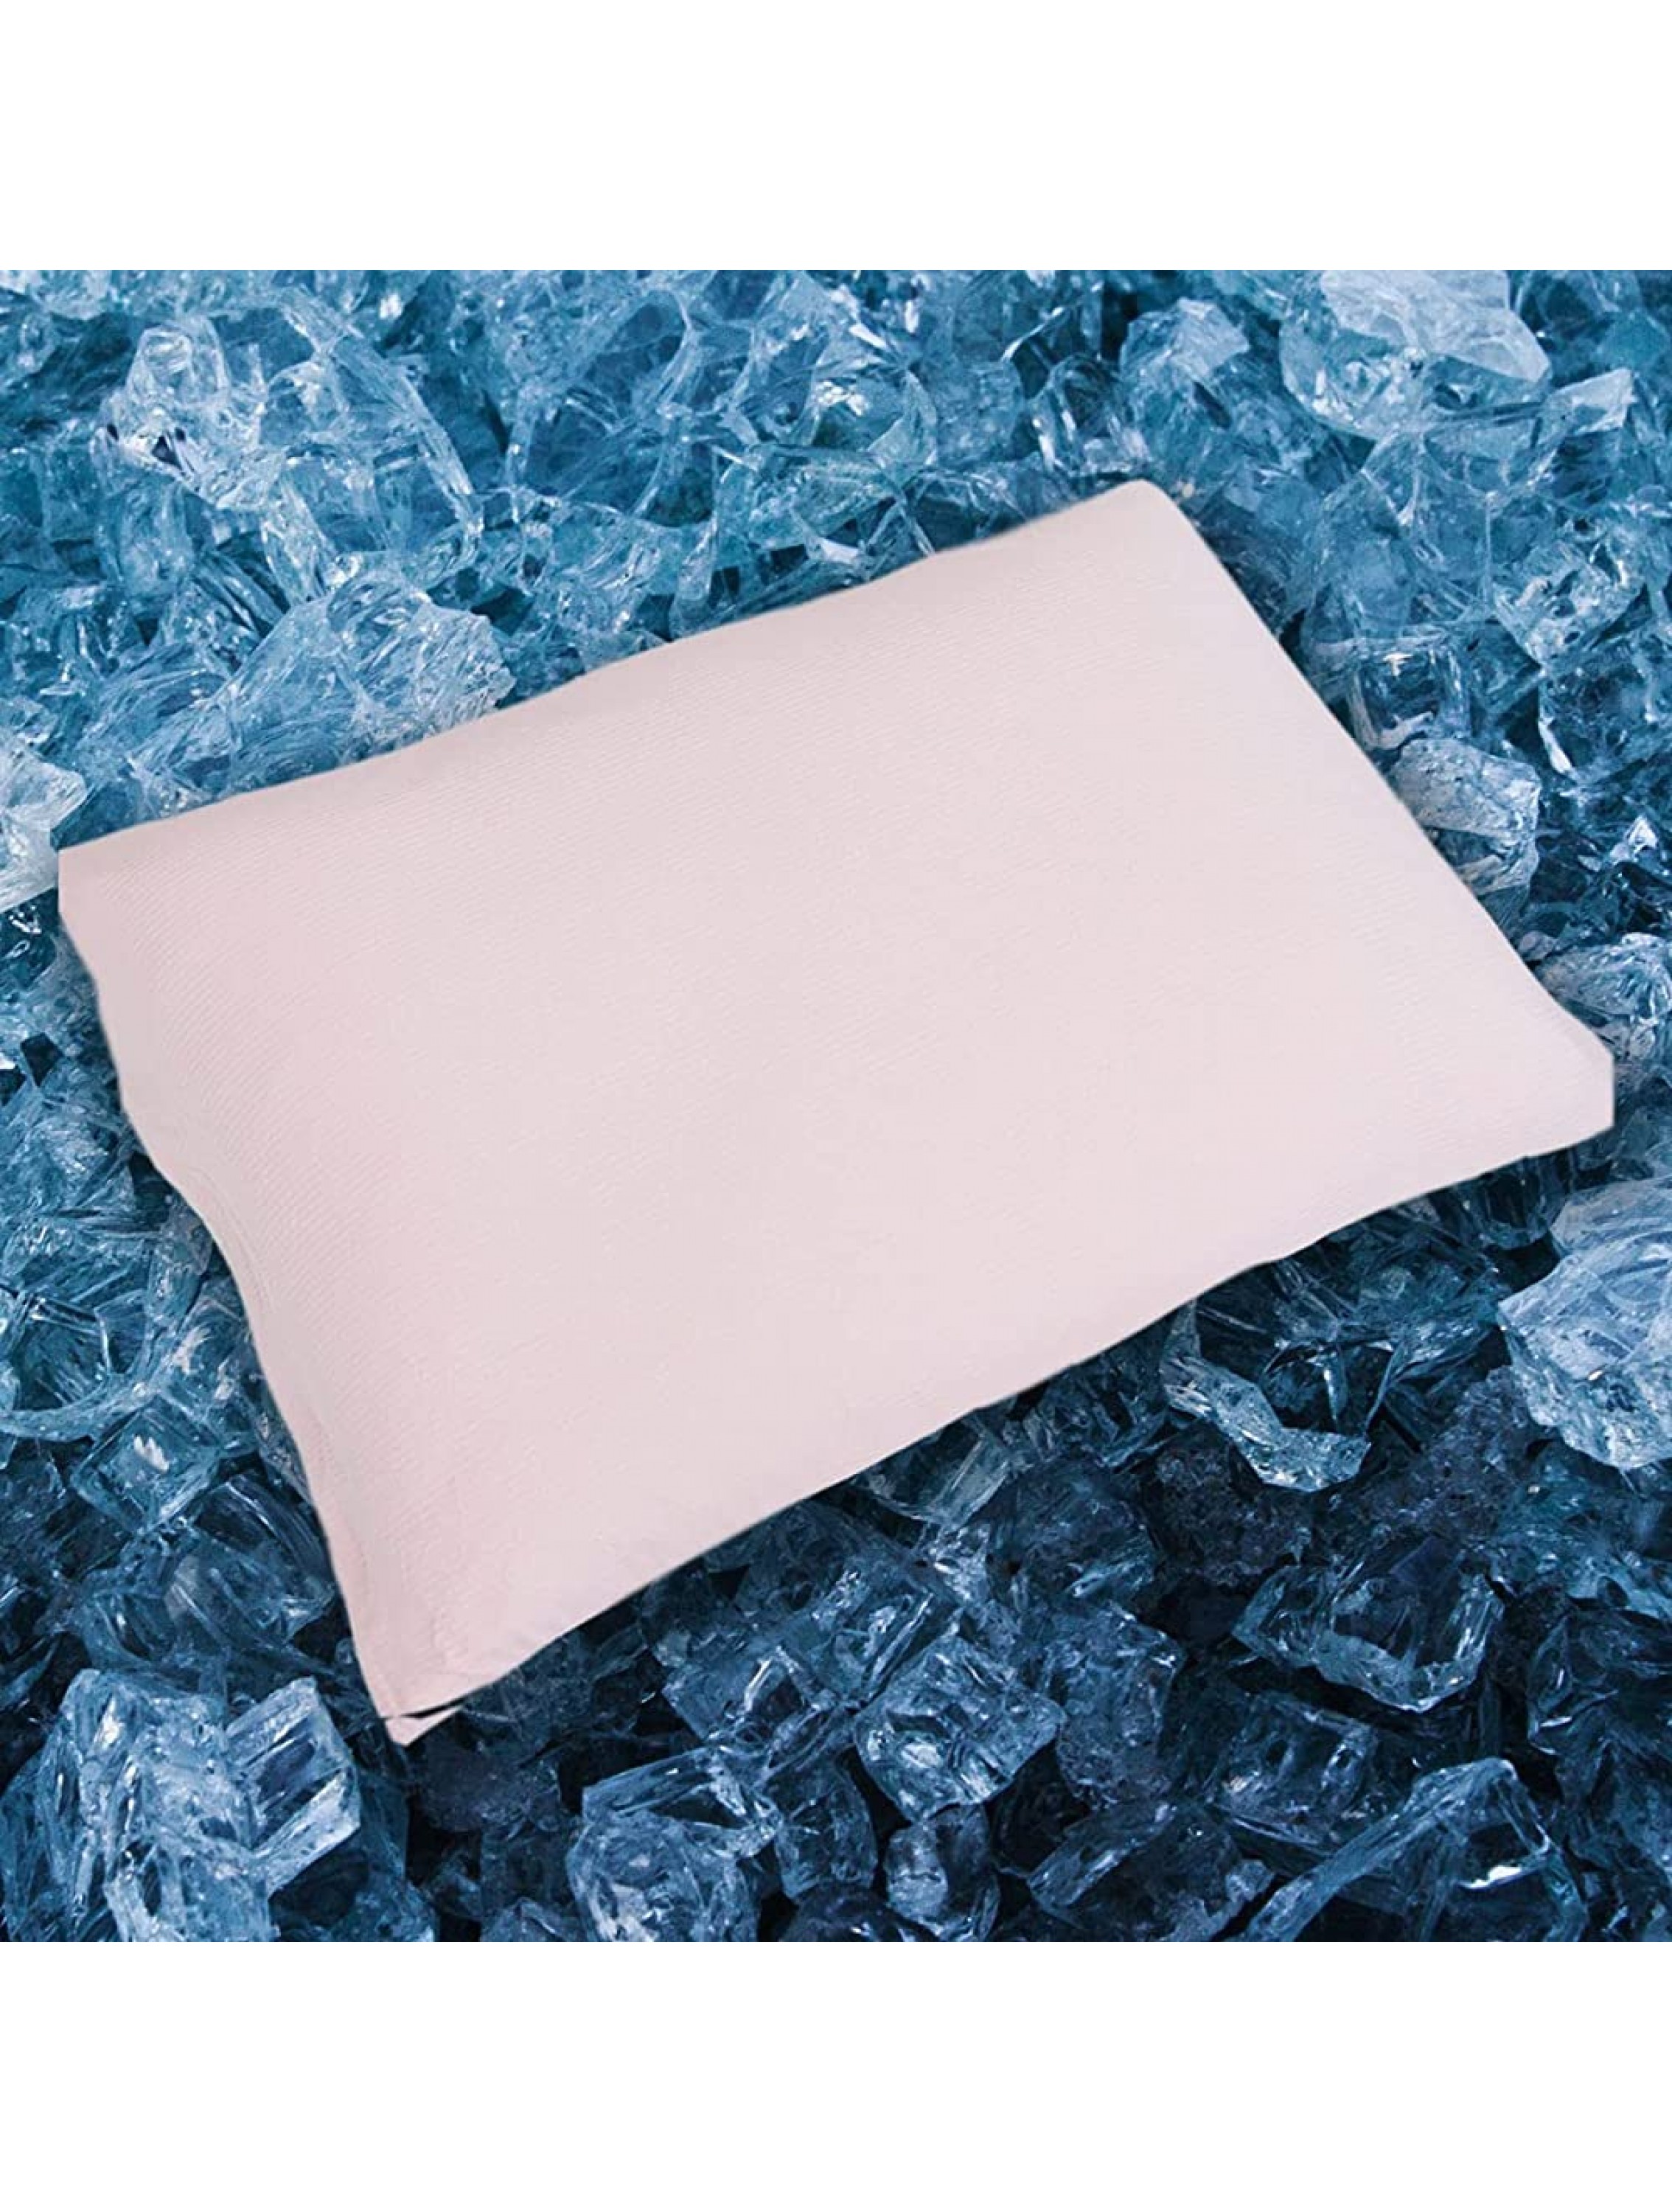 Aki-Home Cooling Pillowcase N-Cool Cool-to-The-Touch Fabric Japanese N-Cool Cooling Bedding Series Machine Washable Pink Standard - BLGT8M9YI